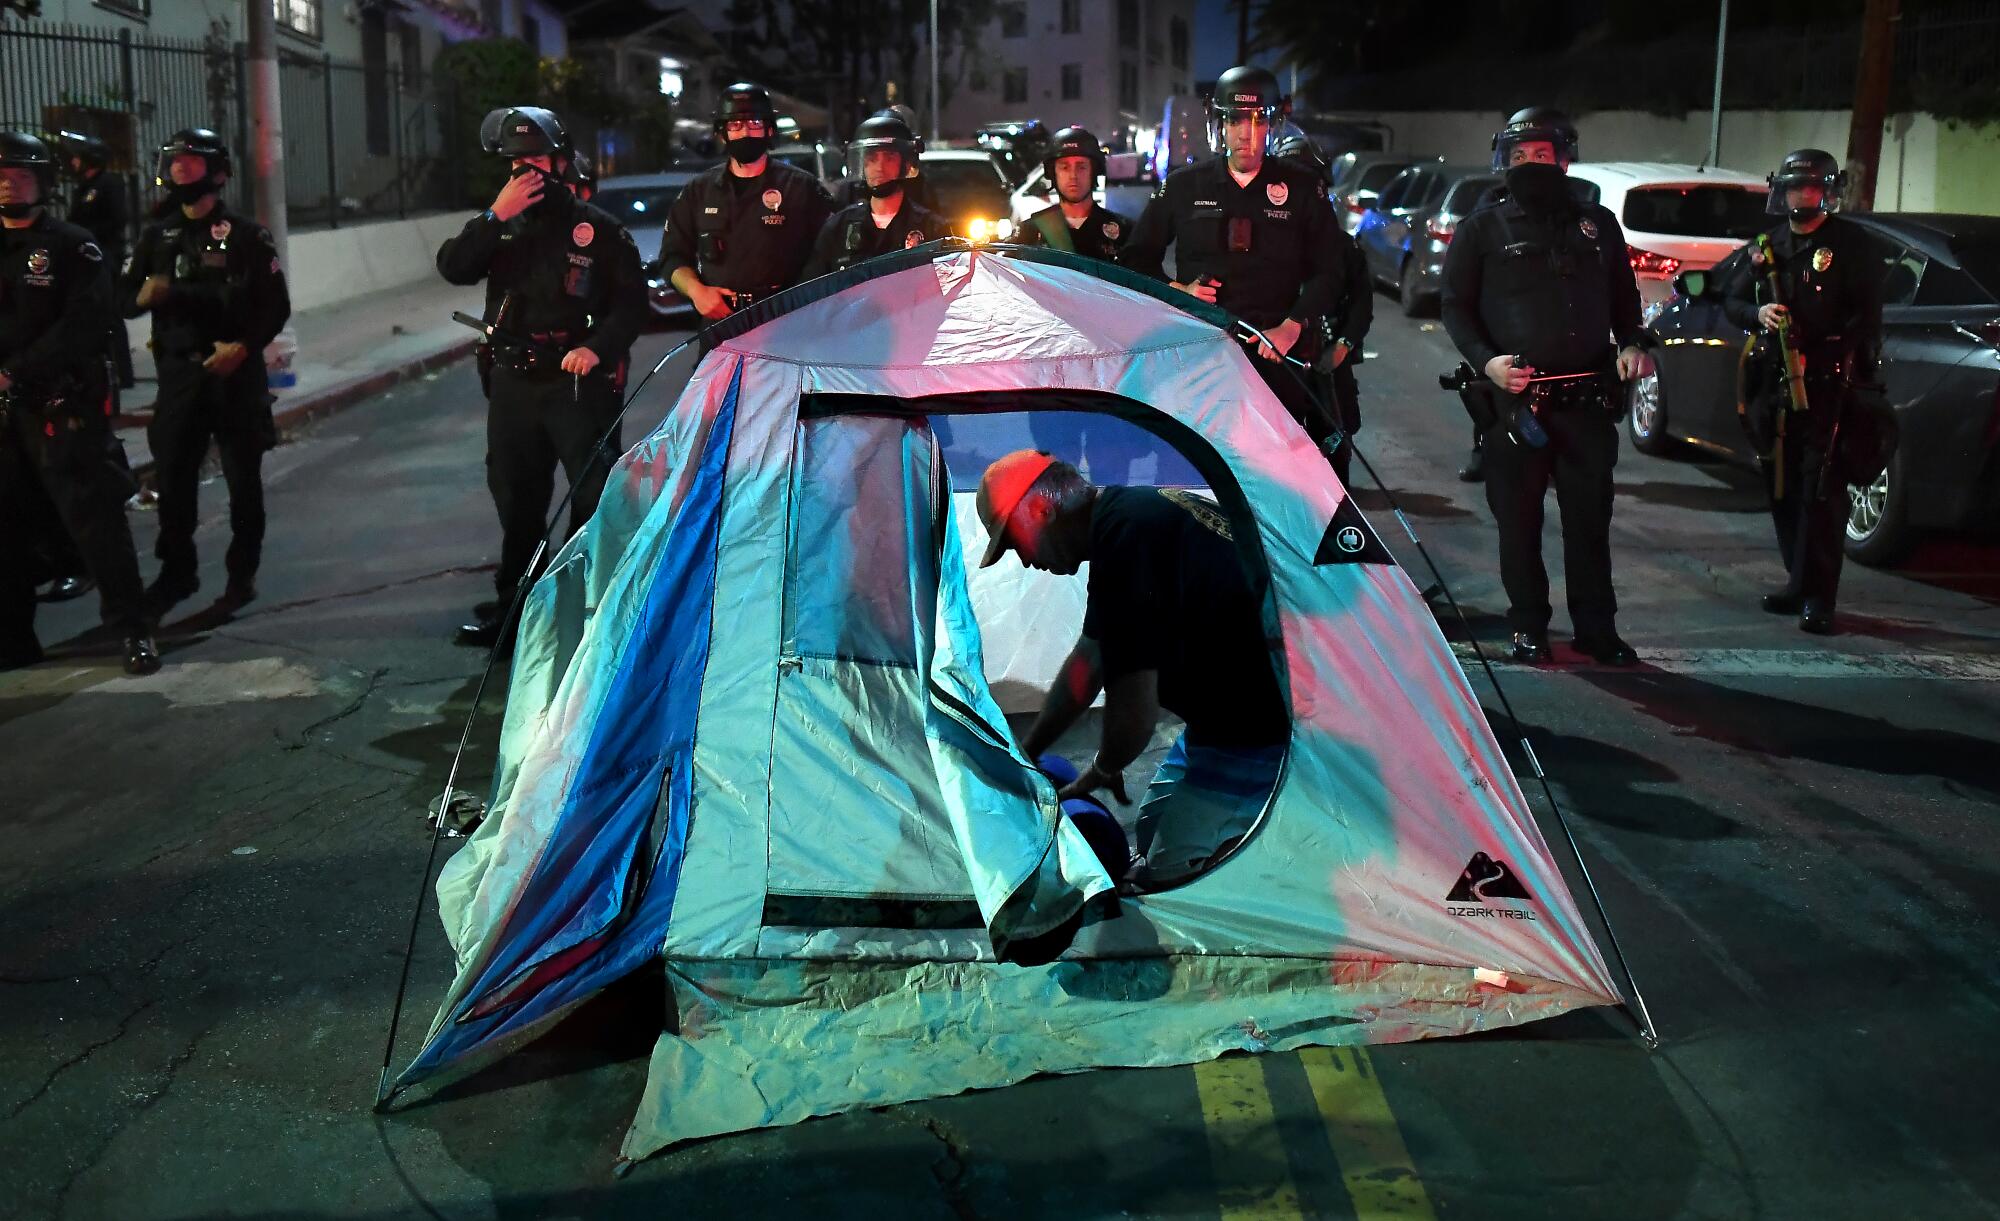 A protester sets up a tent in the street as LAPD officers stand guard 